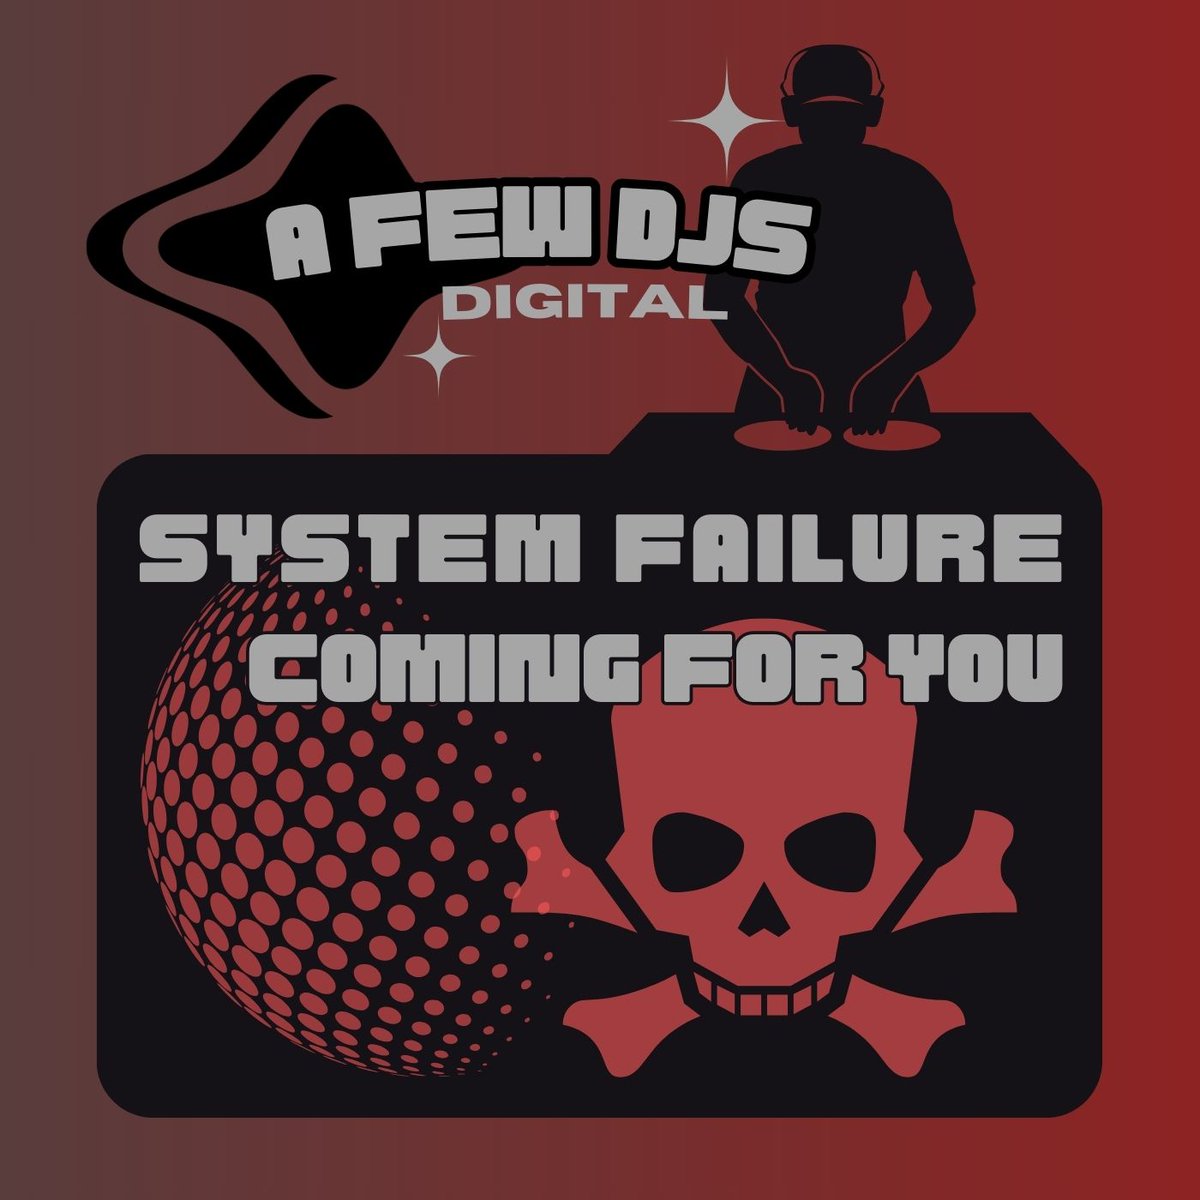 We're loving the latest A Few DJs Digital release 'Coming For You' from System Failure.

Check it out here along with the labels other releases:
bit.ly/comingforyouaf…

#hardhouse #harddance #toolboxdigital #newrelease #newmusic #afewdjsdigital